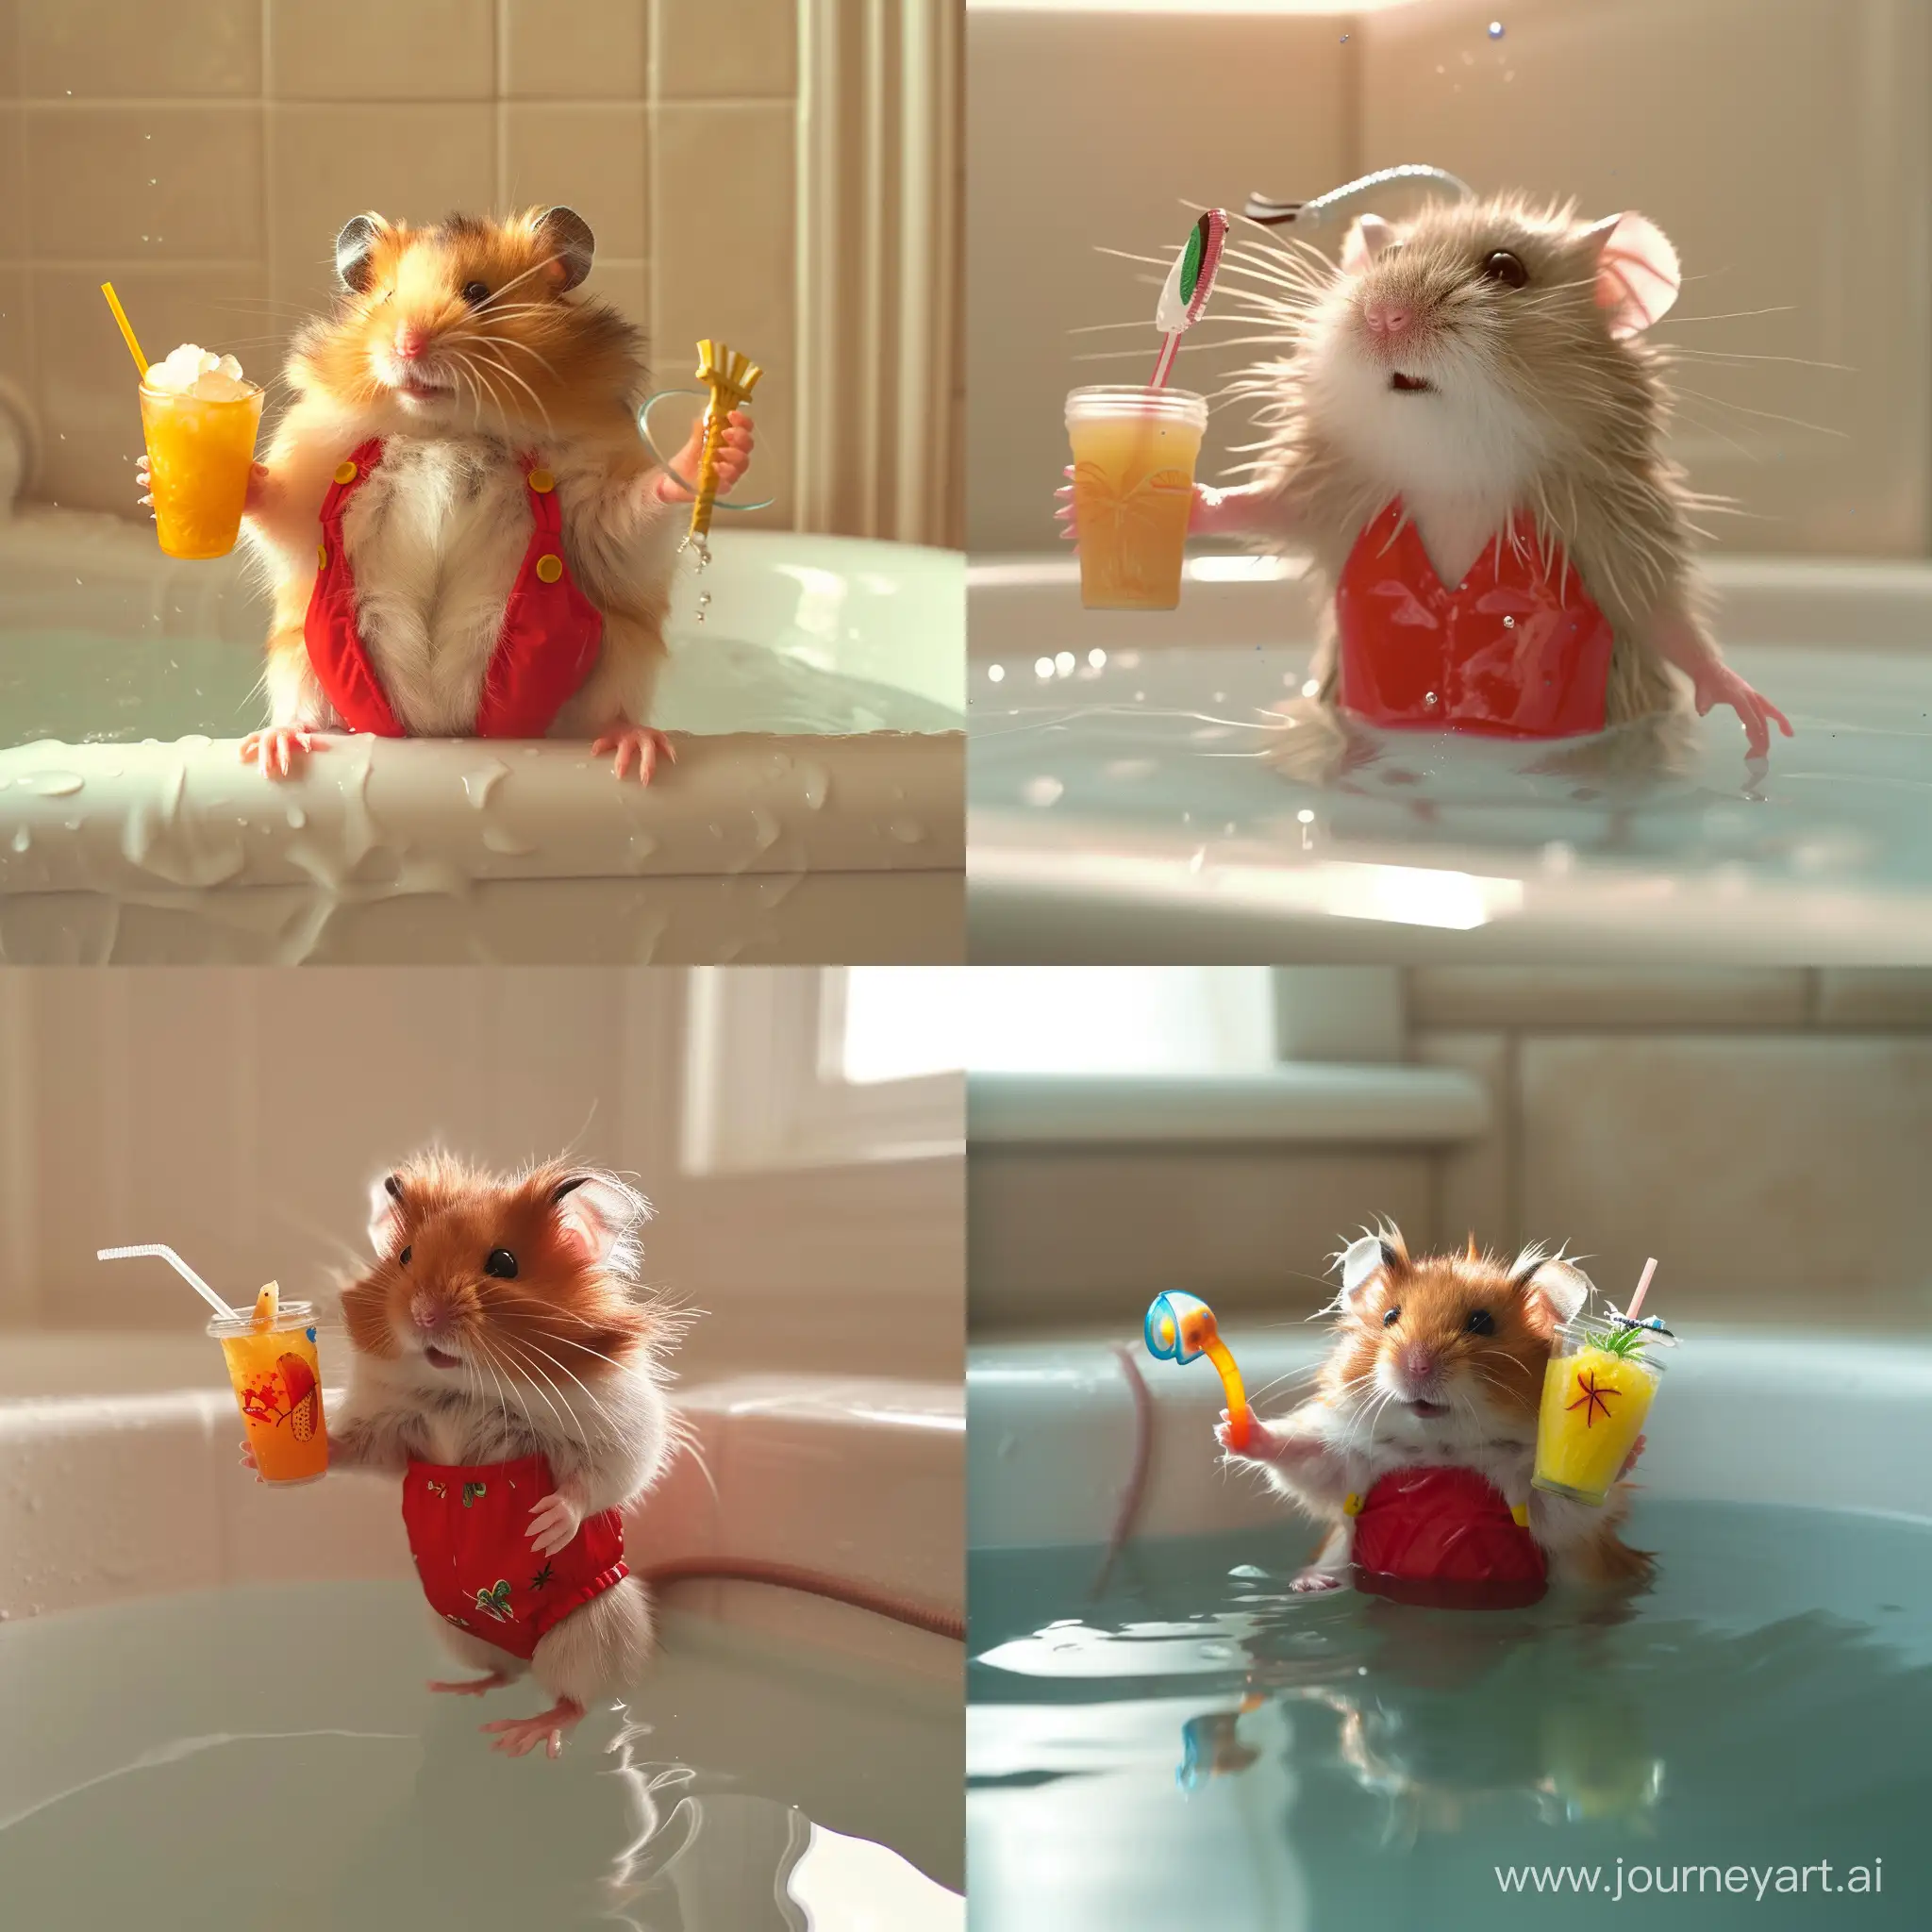 Adorable-Hamster-in-Stylish-Red-Swimsuit-with-Snorkel-Enjoying-a-Pina-Colada-in-a-Sunny-Bathtub